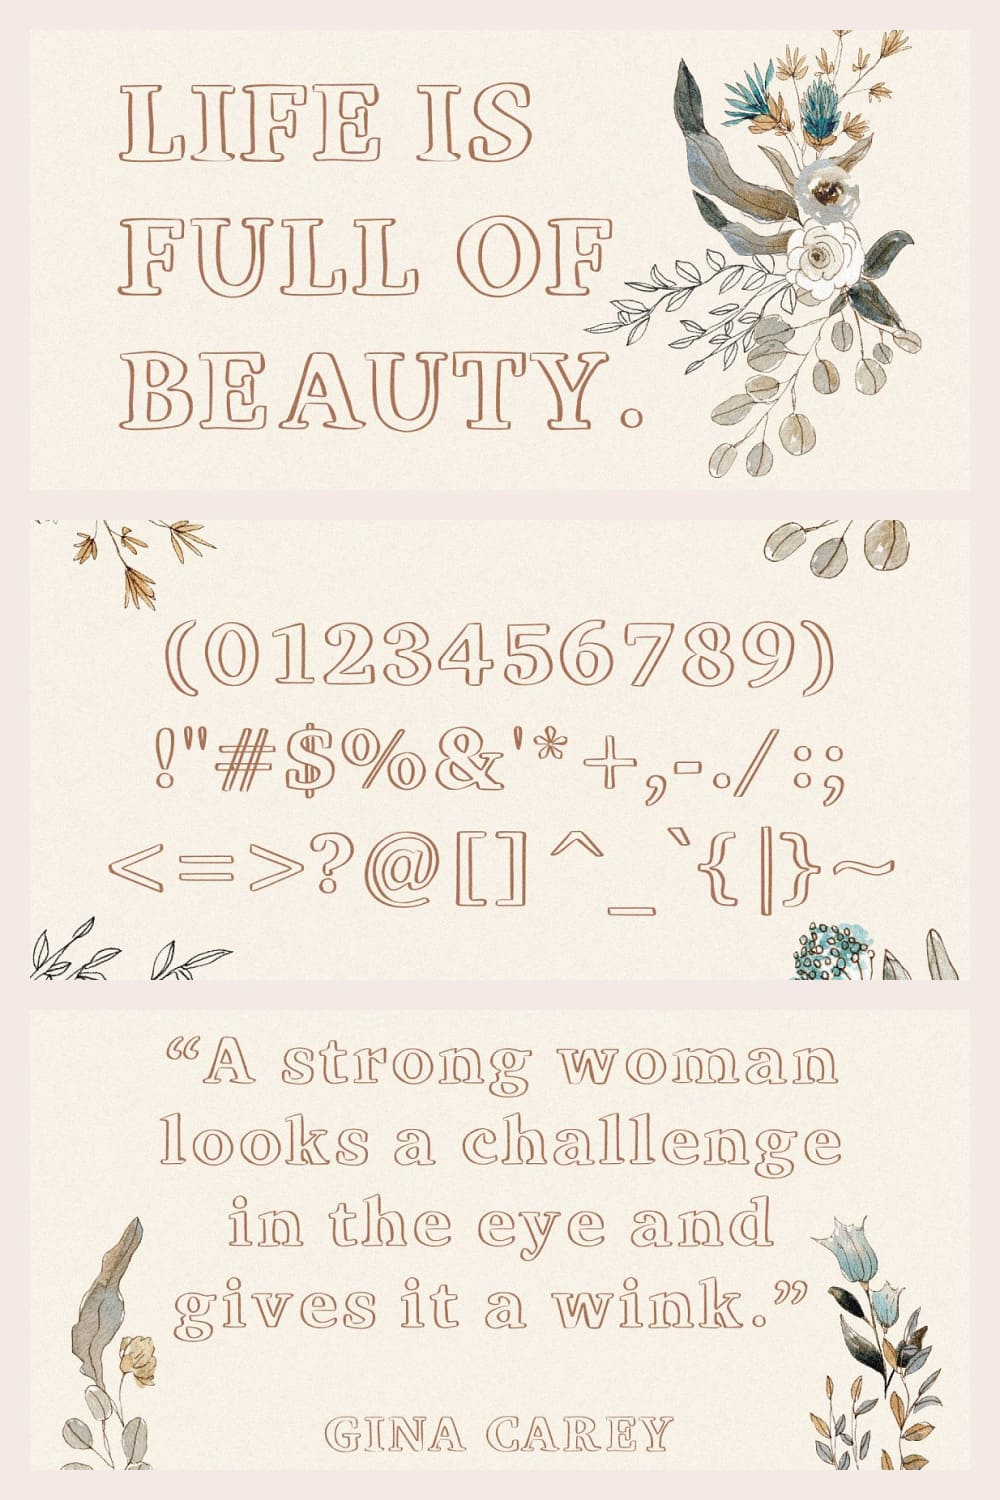 Viktoria - Outline Serif Typeface Preview With Symbols - "A Strong Woman Looks A Challenge In The Eye And Gives It A Wink".